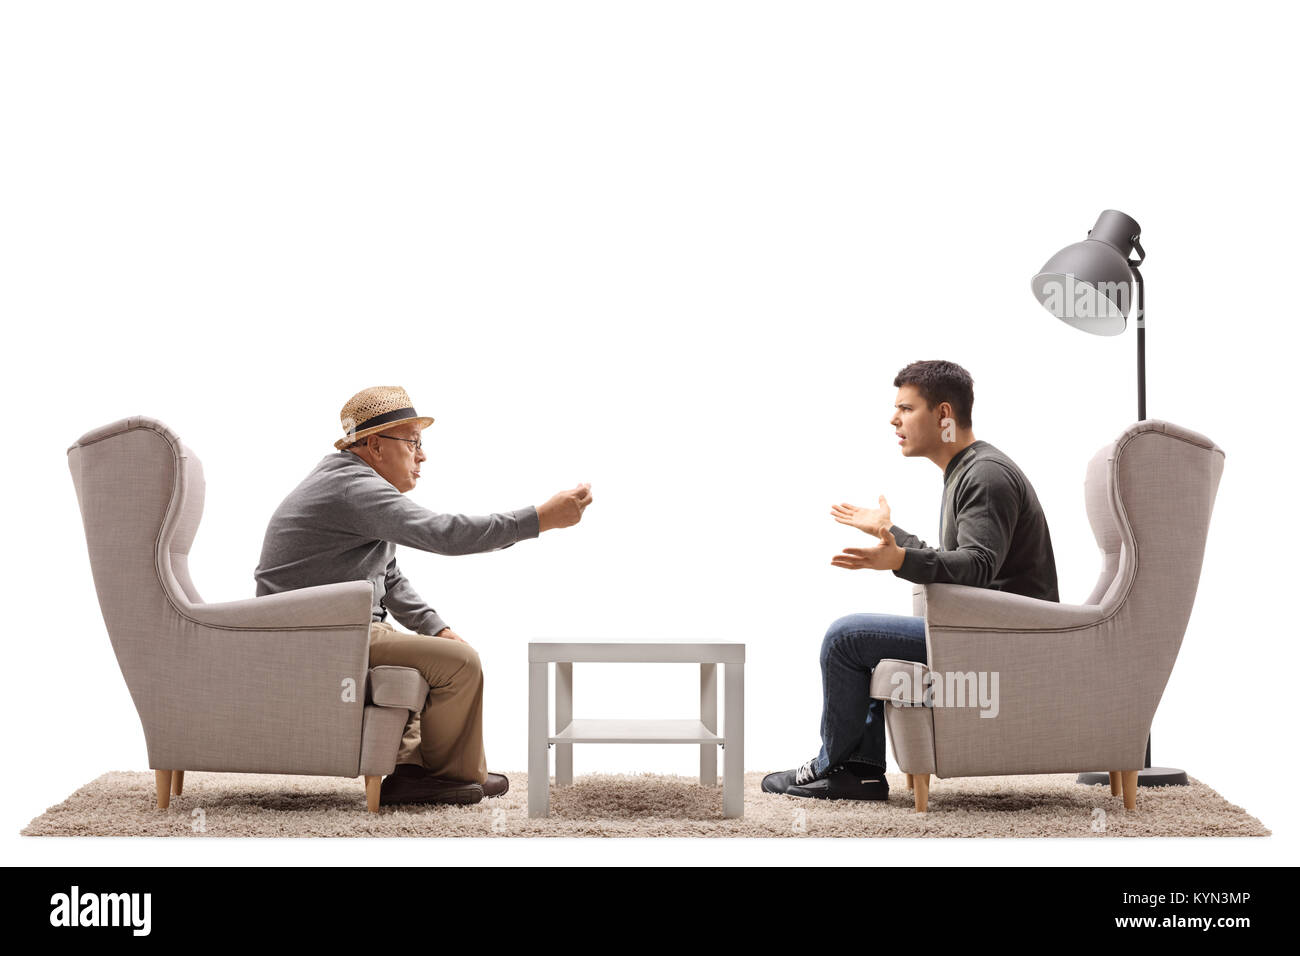 Mature man and a young guy seated in armchairs arguing isolated on white background Stock Photo